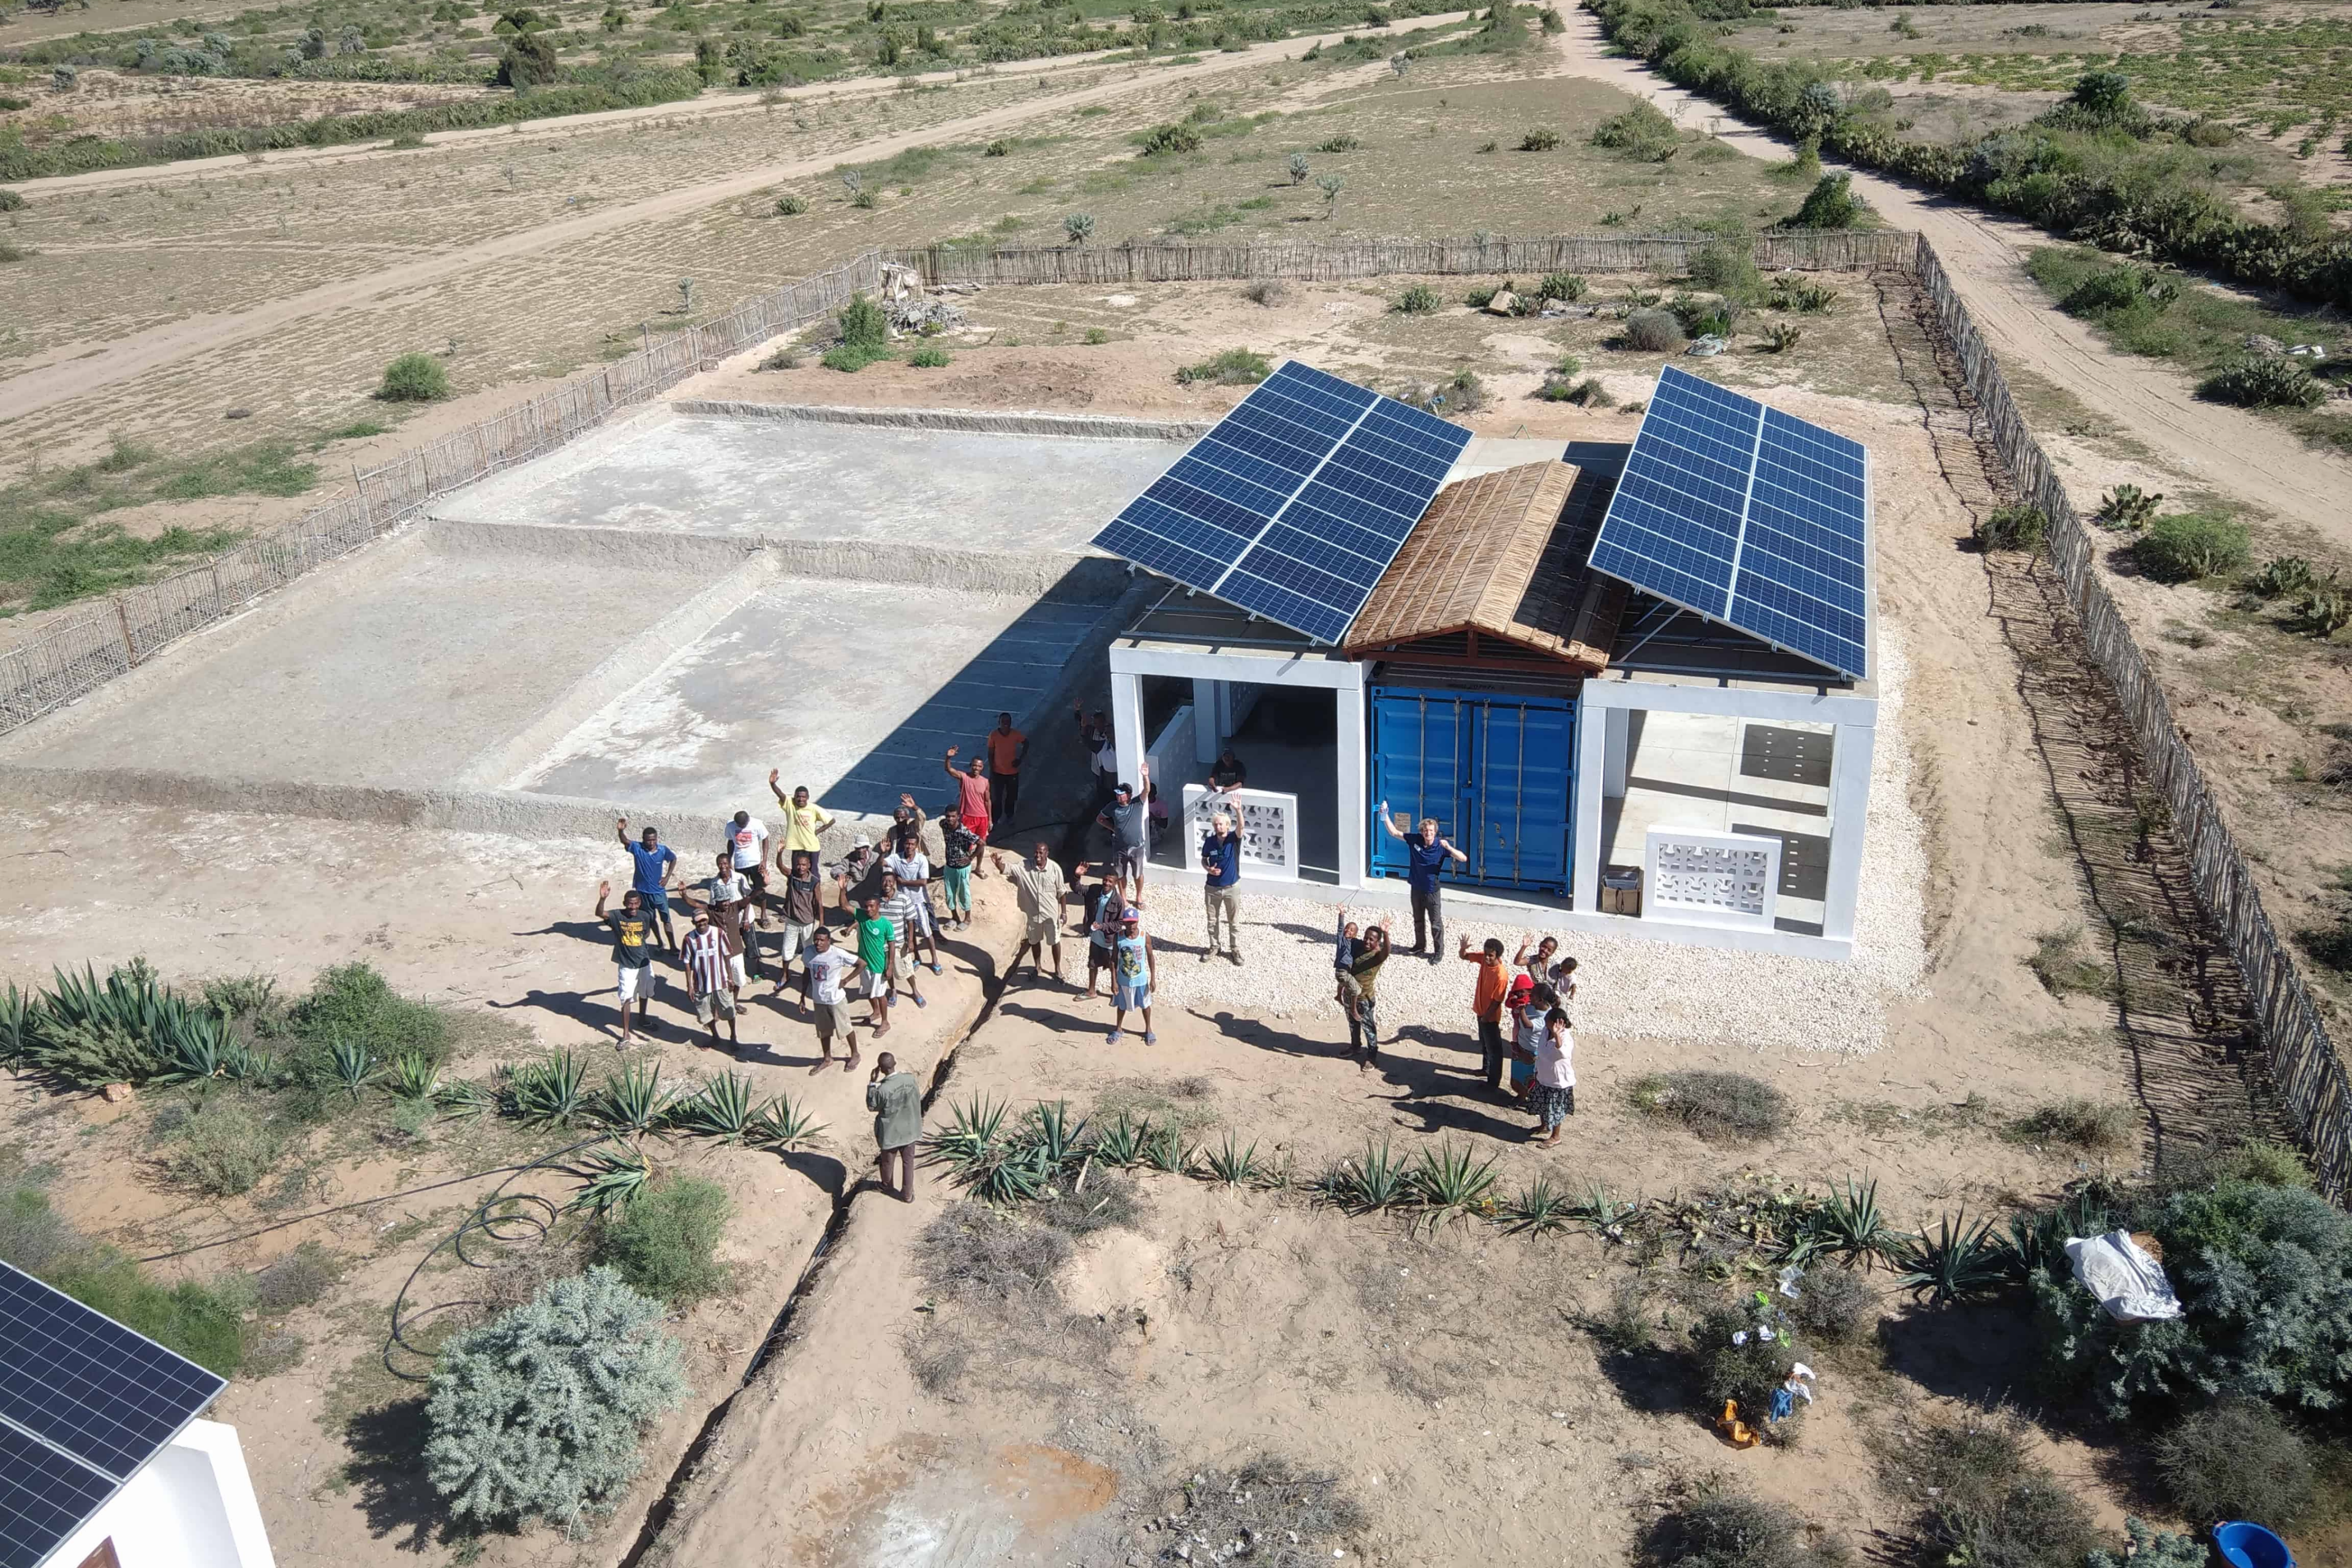 Aerial shot of a group of people in front of solar panel